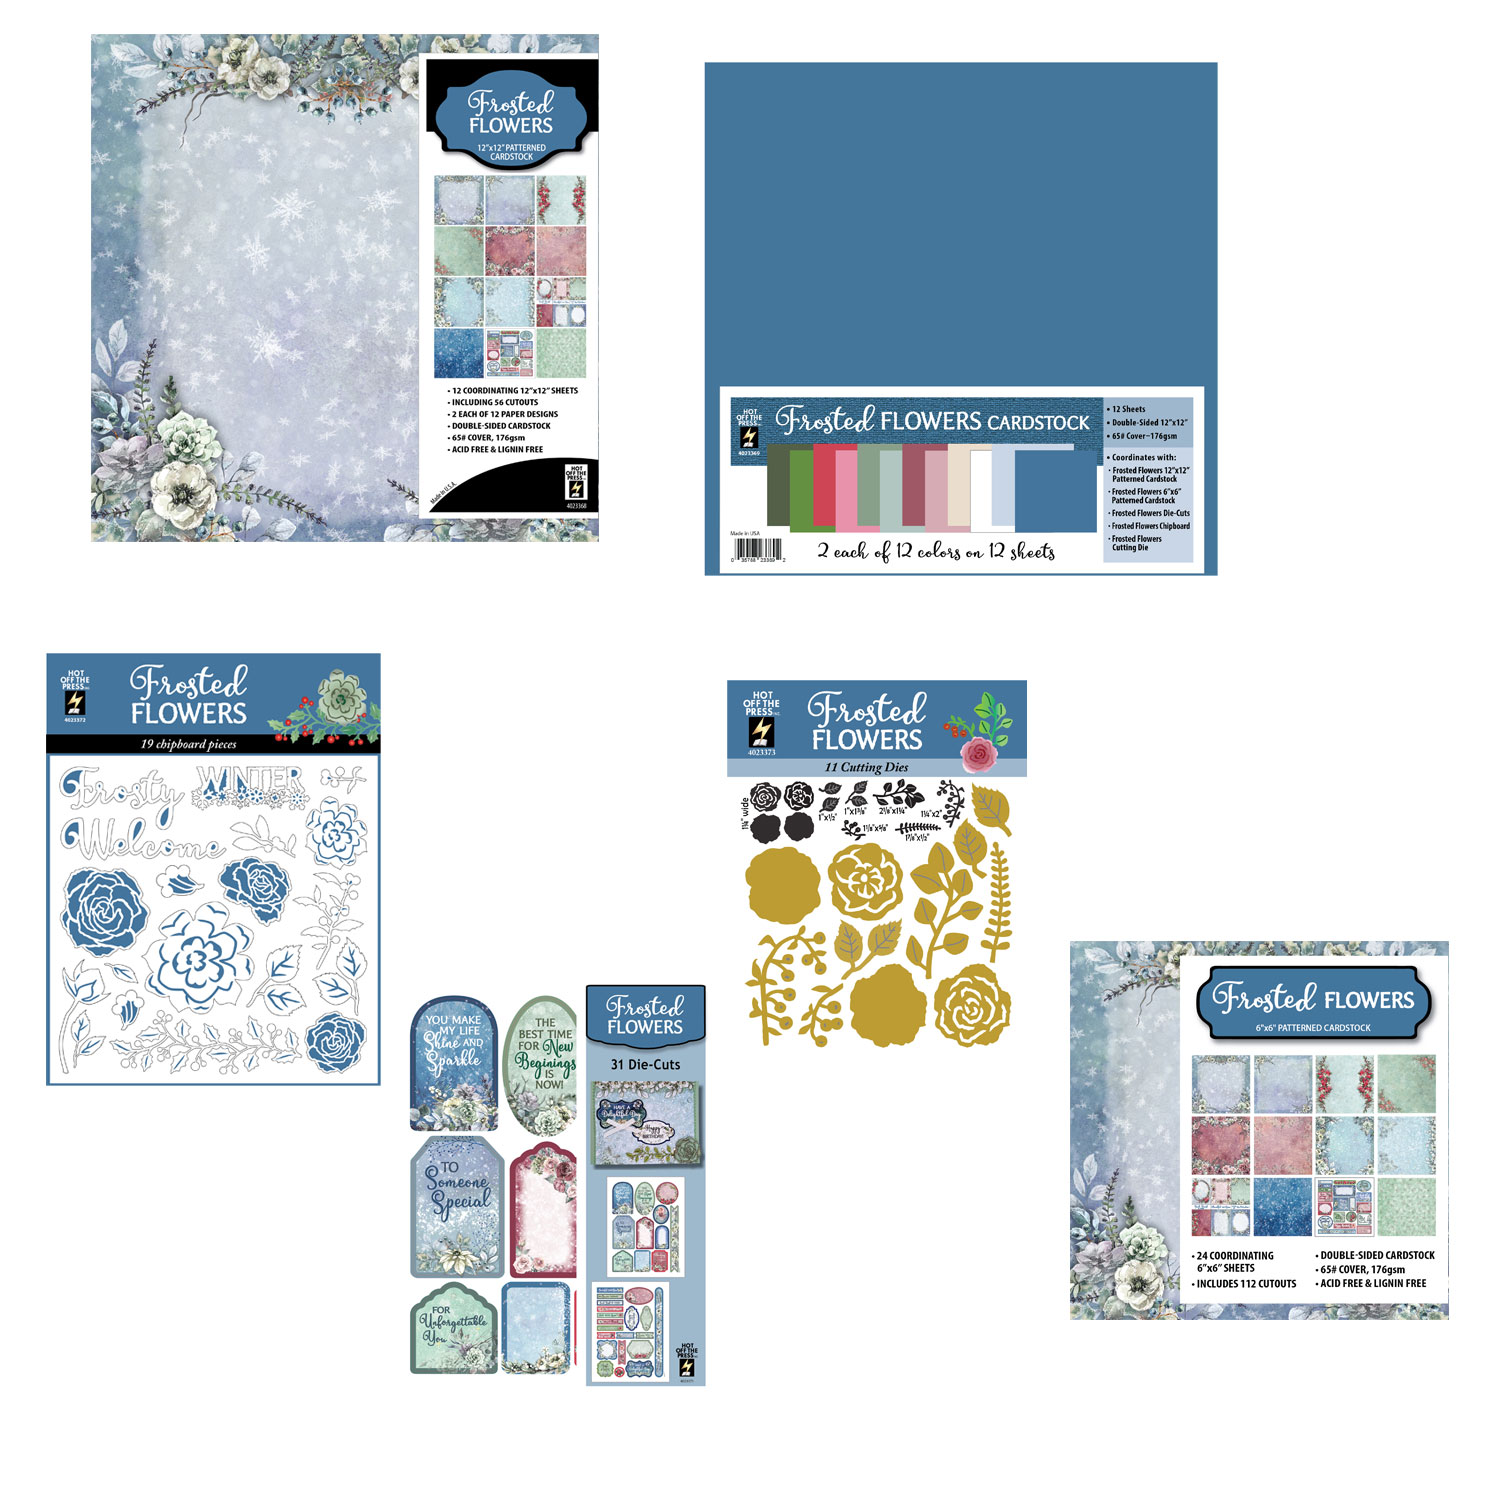 Frosted Florals by Hot Off The Press Money Saver